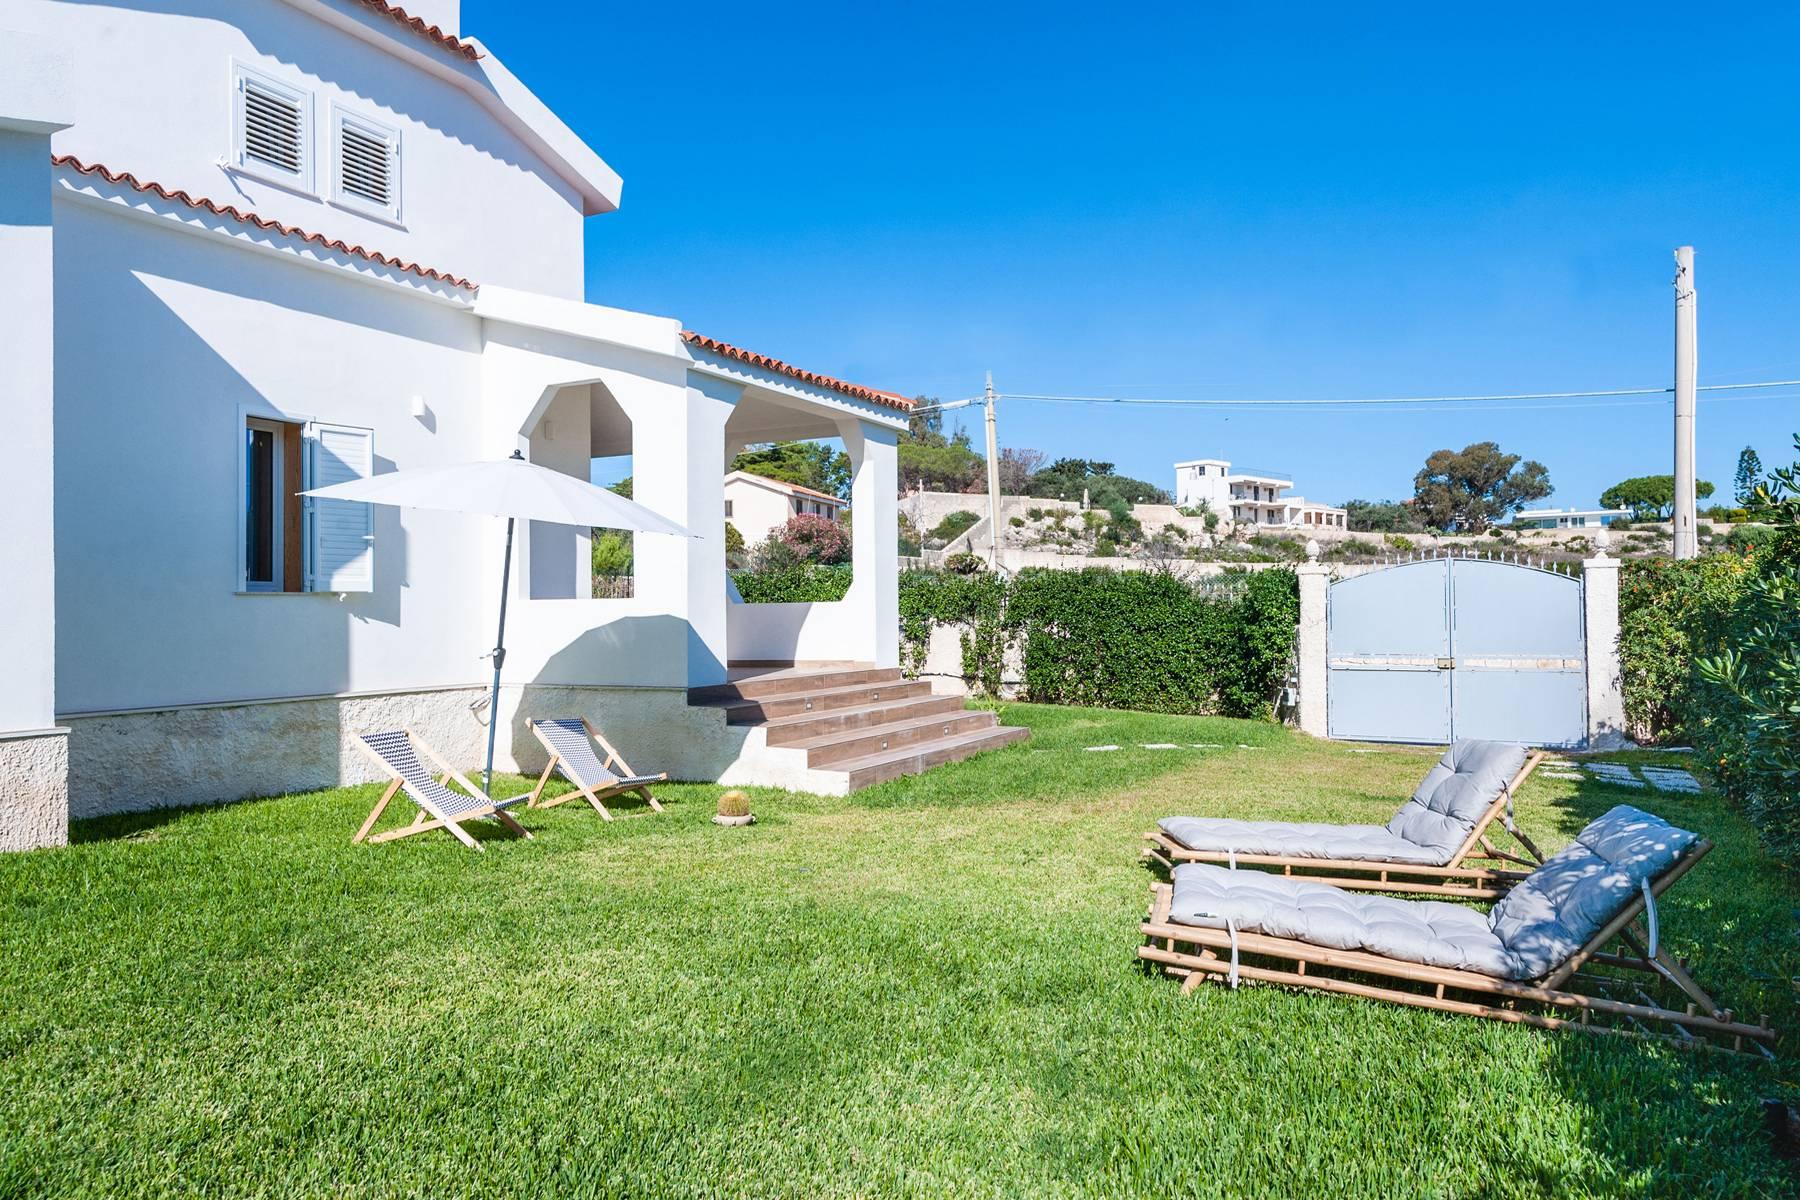 Villa in the Plemmirio Marine Protected Area with direct access to the sea - 16